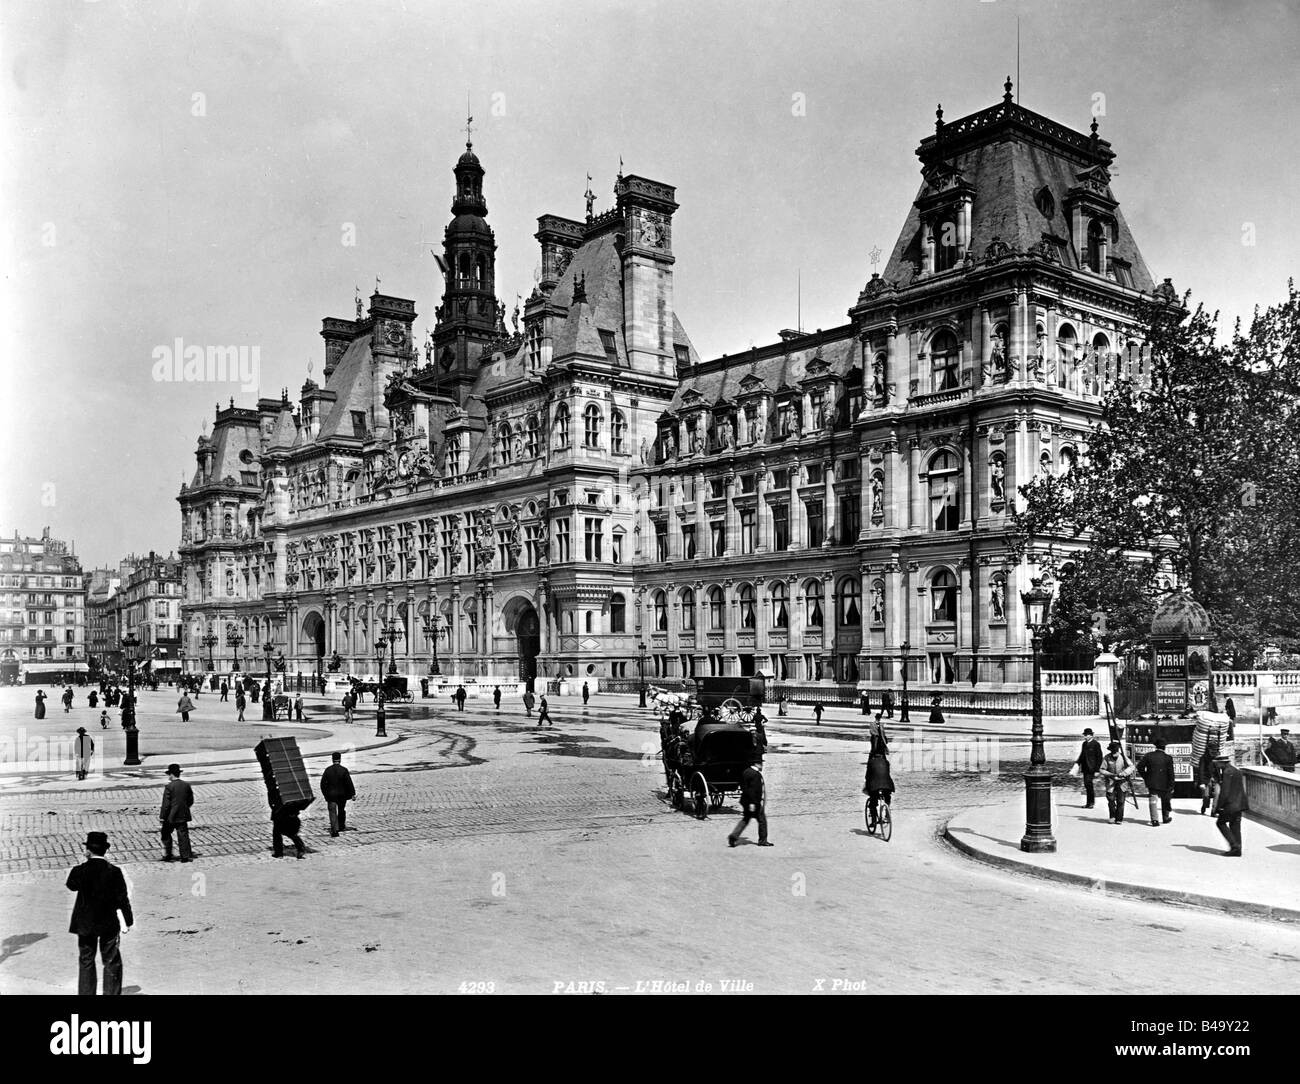 geography / travel, France, Paris, buildings, town hall, (Hotel de Ville), built by Theodore Ballu and Pierre Deperthes from 1874 - 1882, 1904, historic, historical, Europe, 19th / 20th century, architecture, historism, street scenes, scene, people, pedestrians, city hall, 1900s, Stock Photo